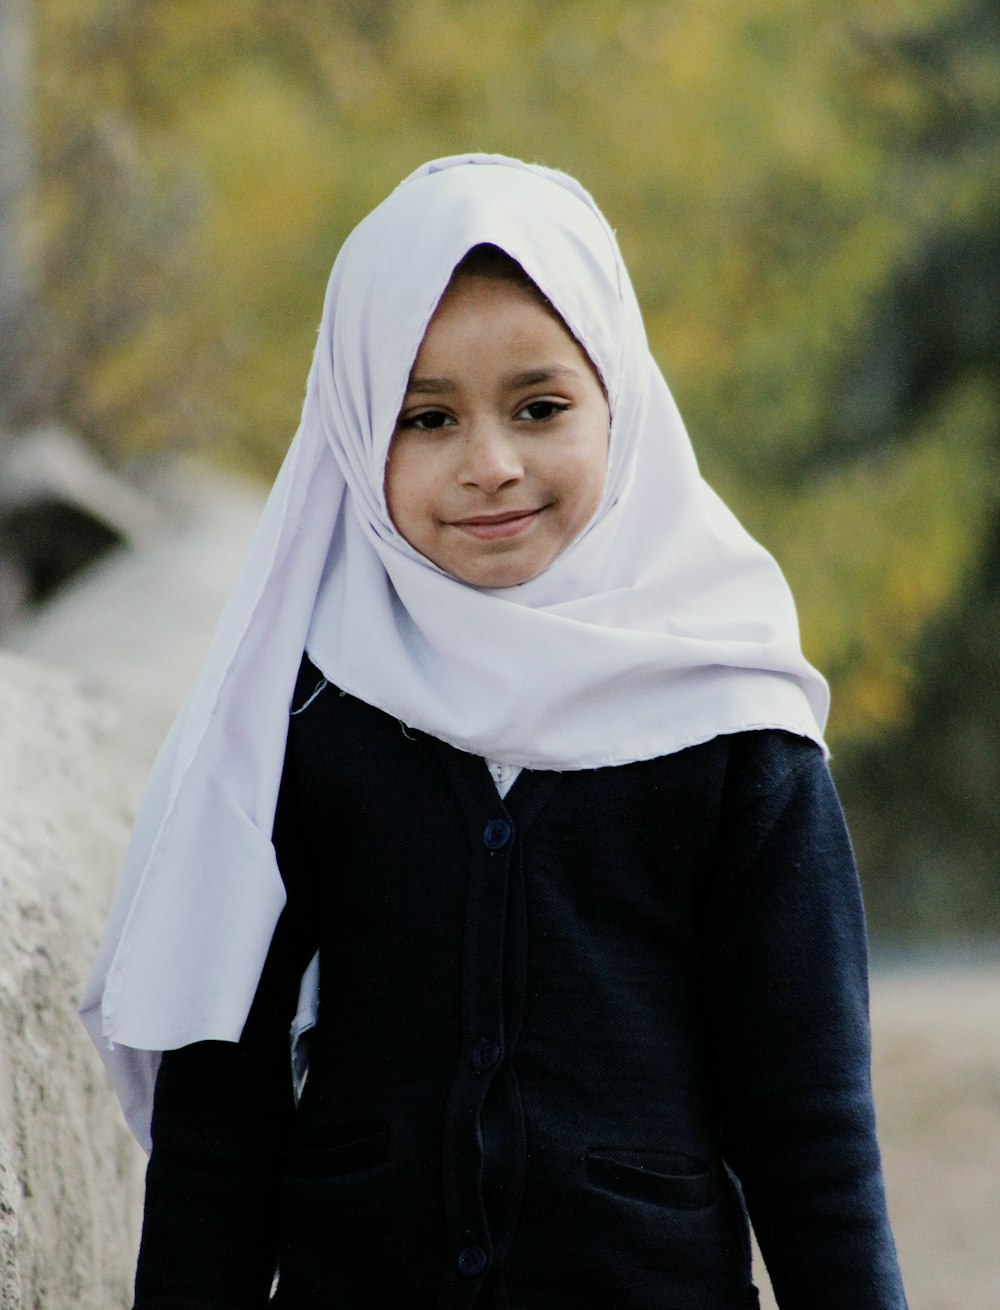 a young girl wearing a white headscarf standing next to a stone wall